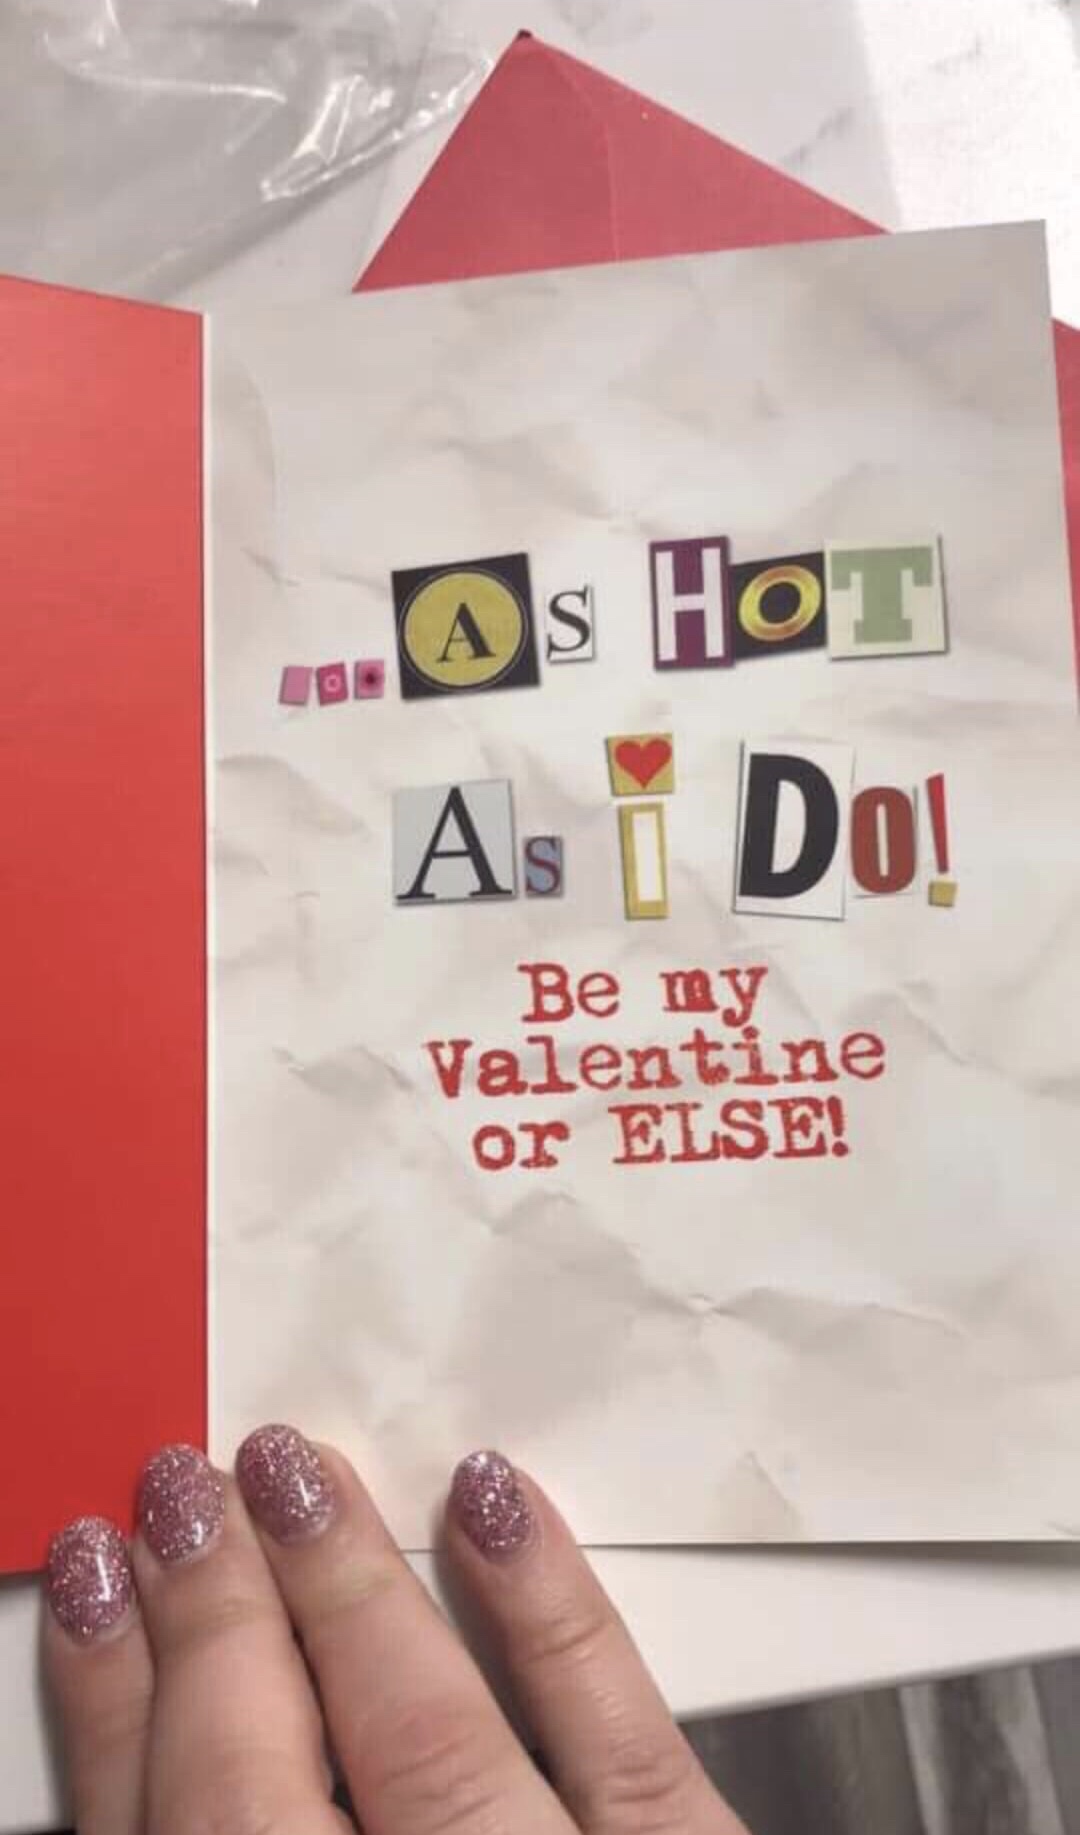 memes - scary valentine's day cards - As Hot As i Do! Be my Valentine or Else!